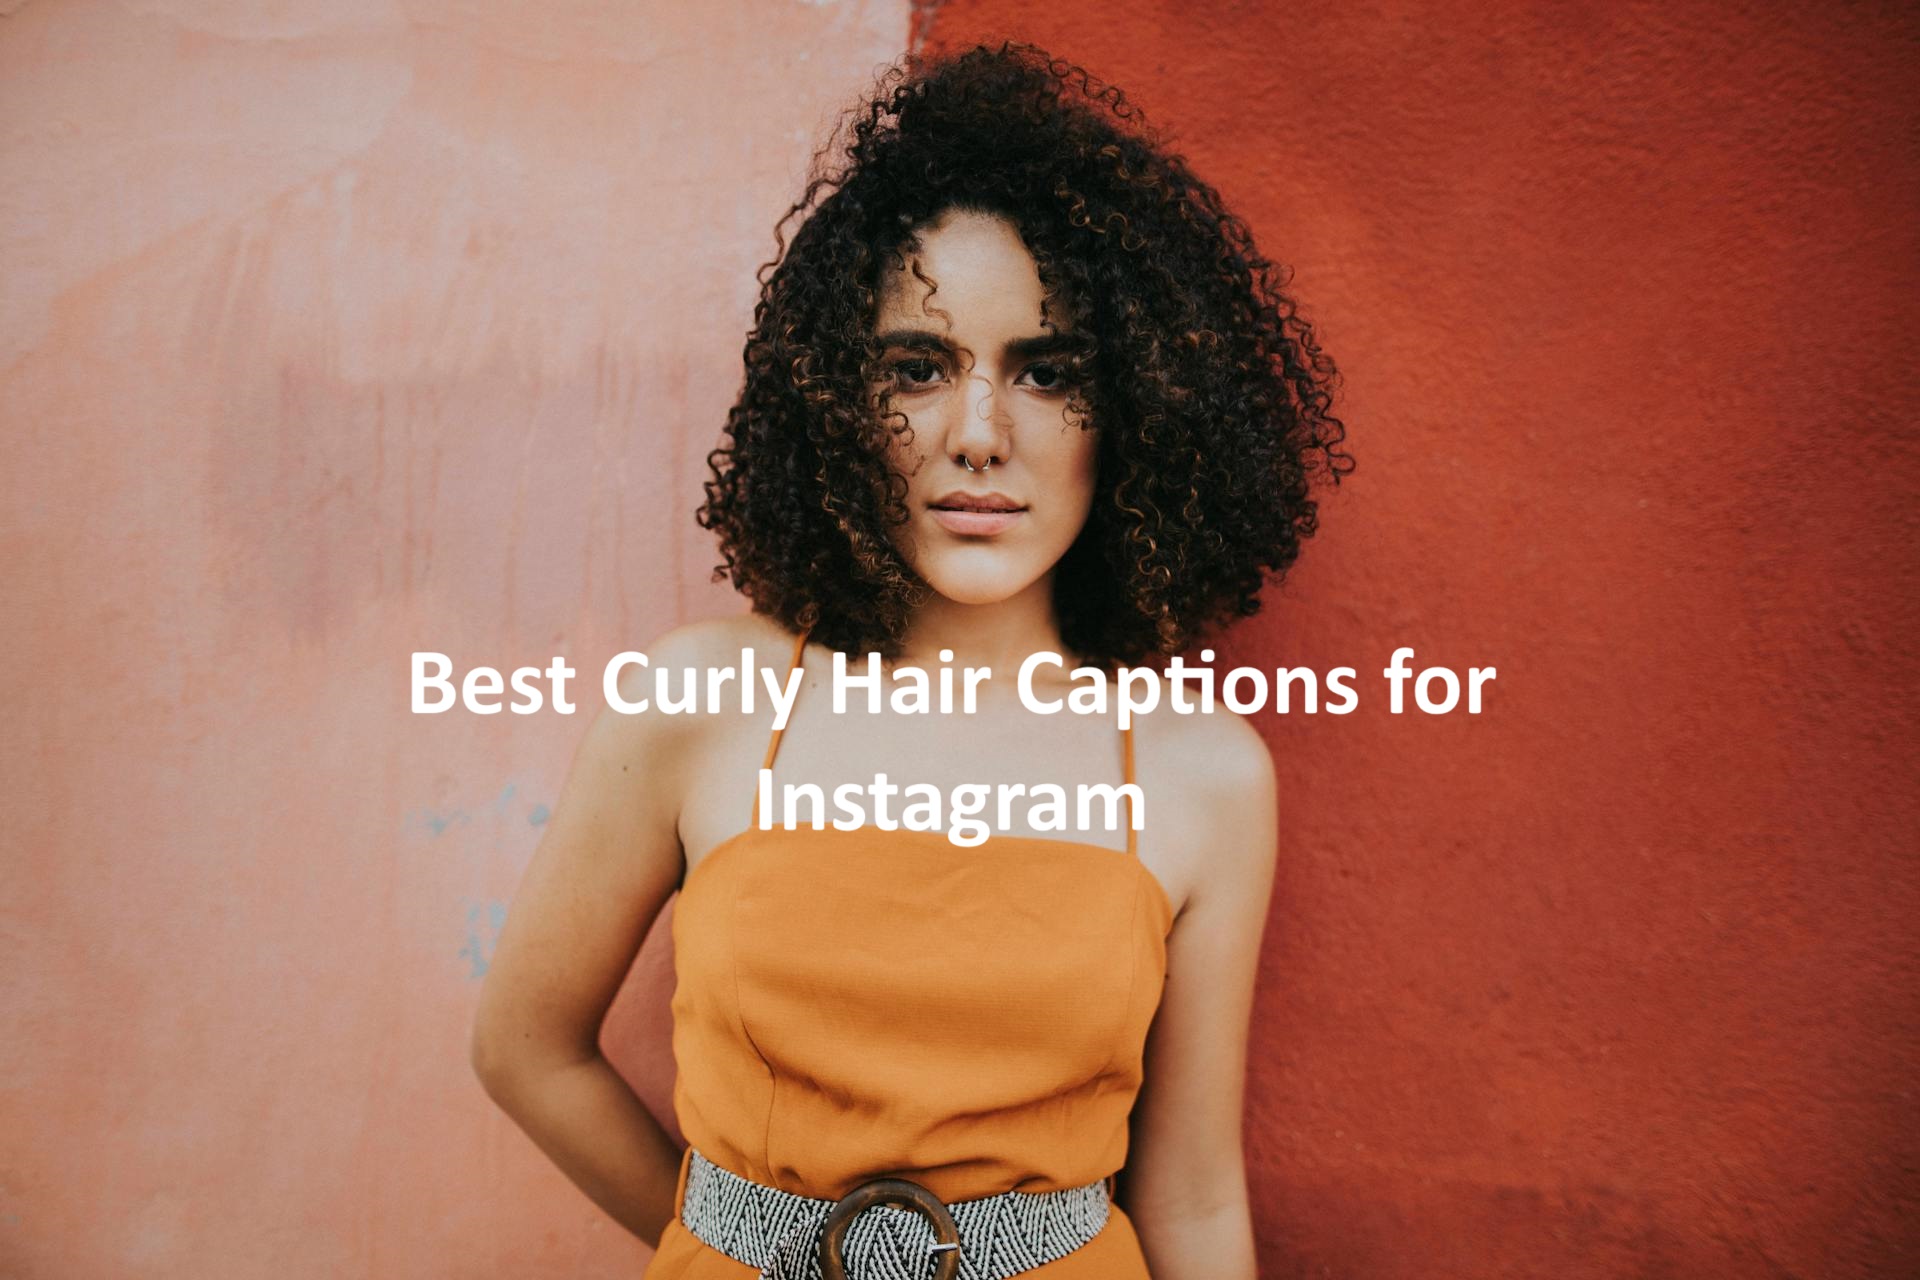 Curly Hair Captions for Instagram